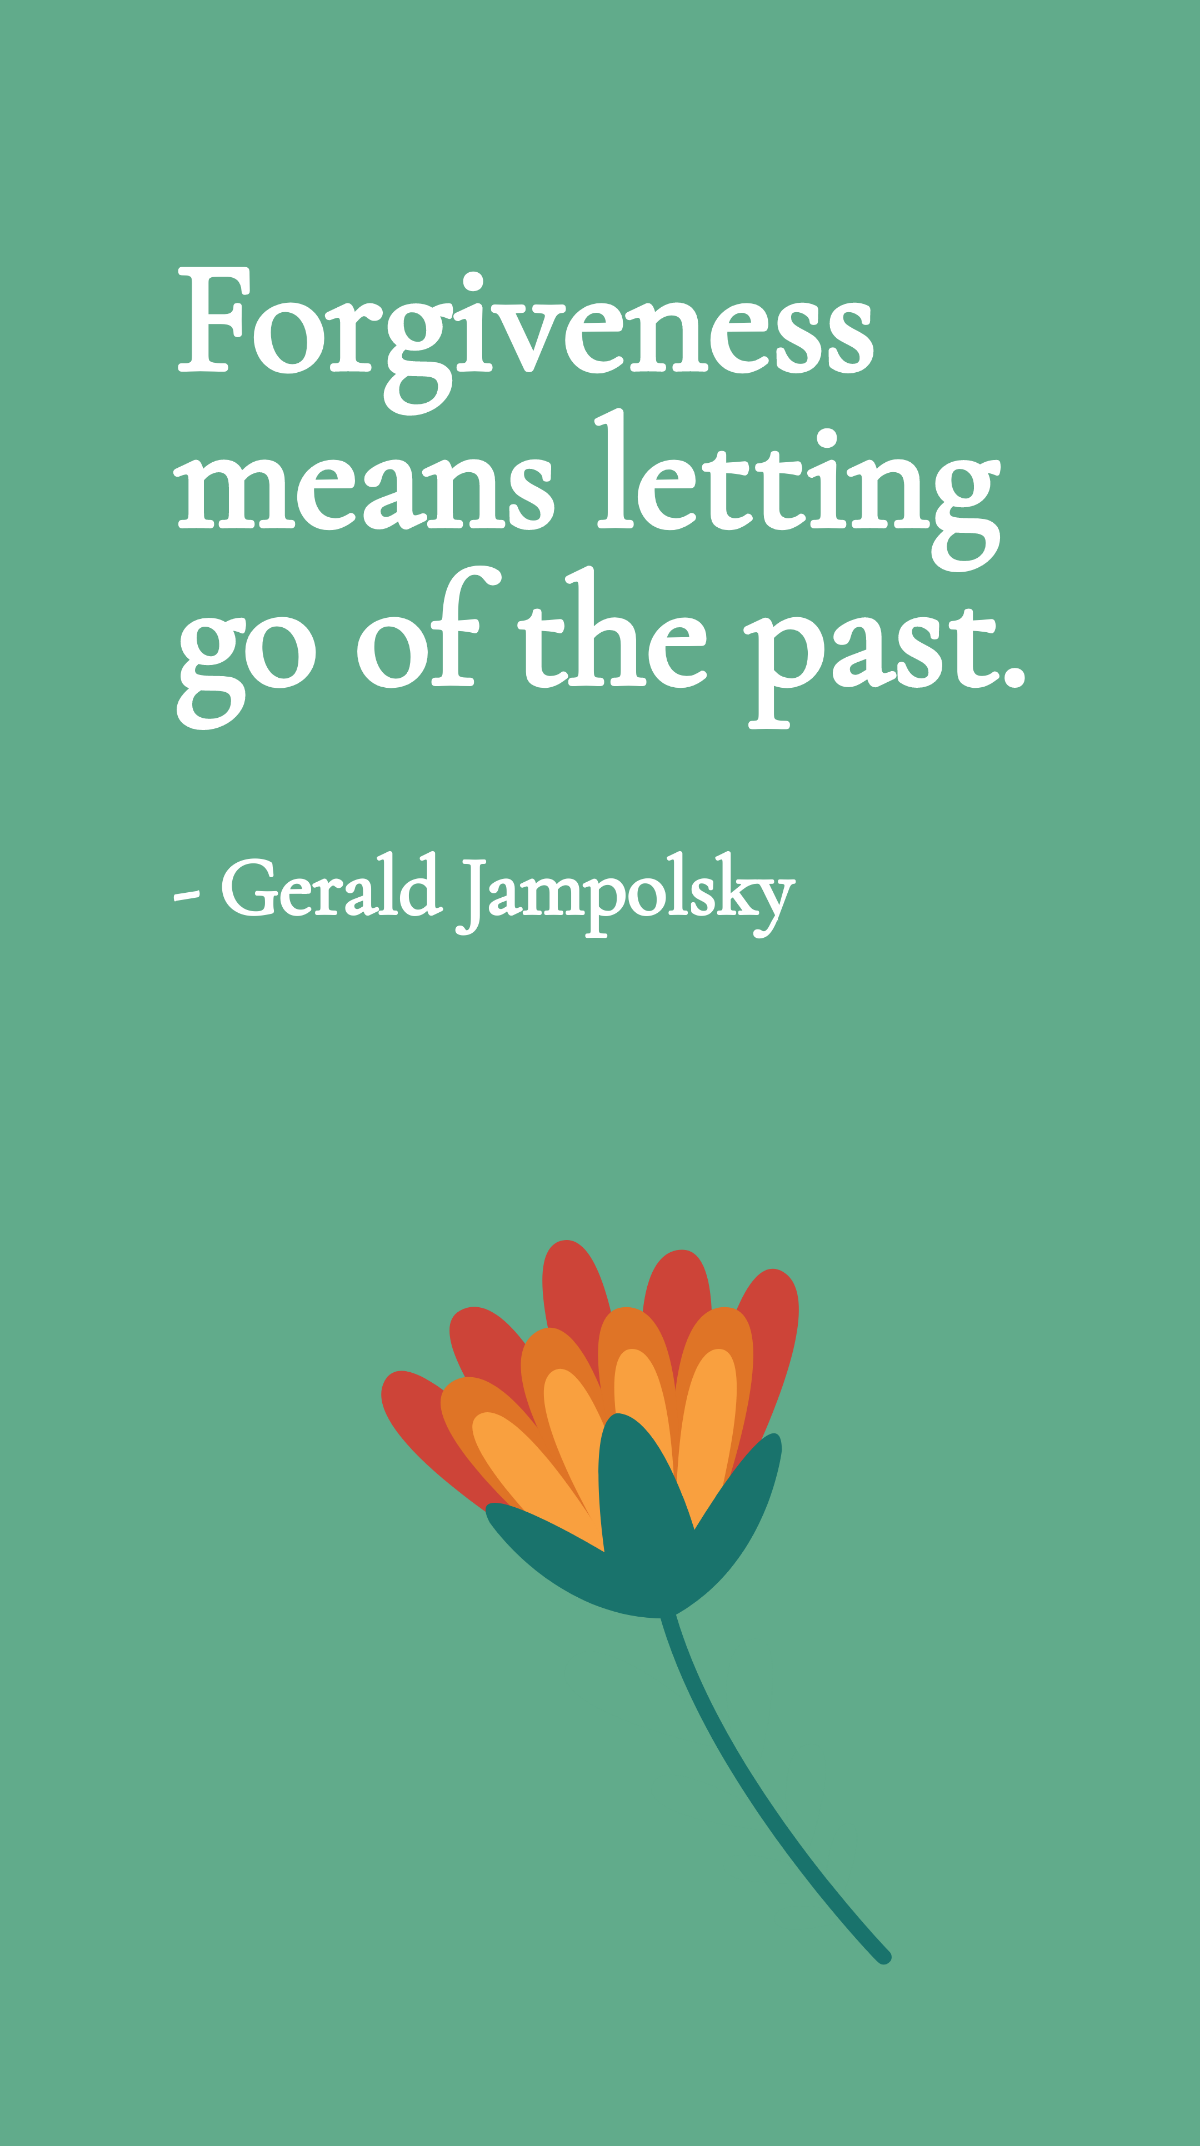 Gerald Jampolsky - Forgiveness means letting go of the past.